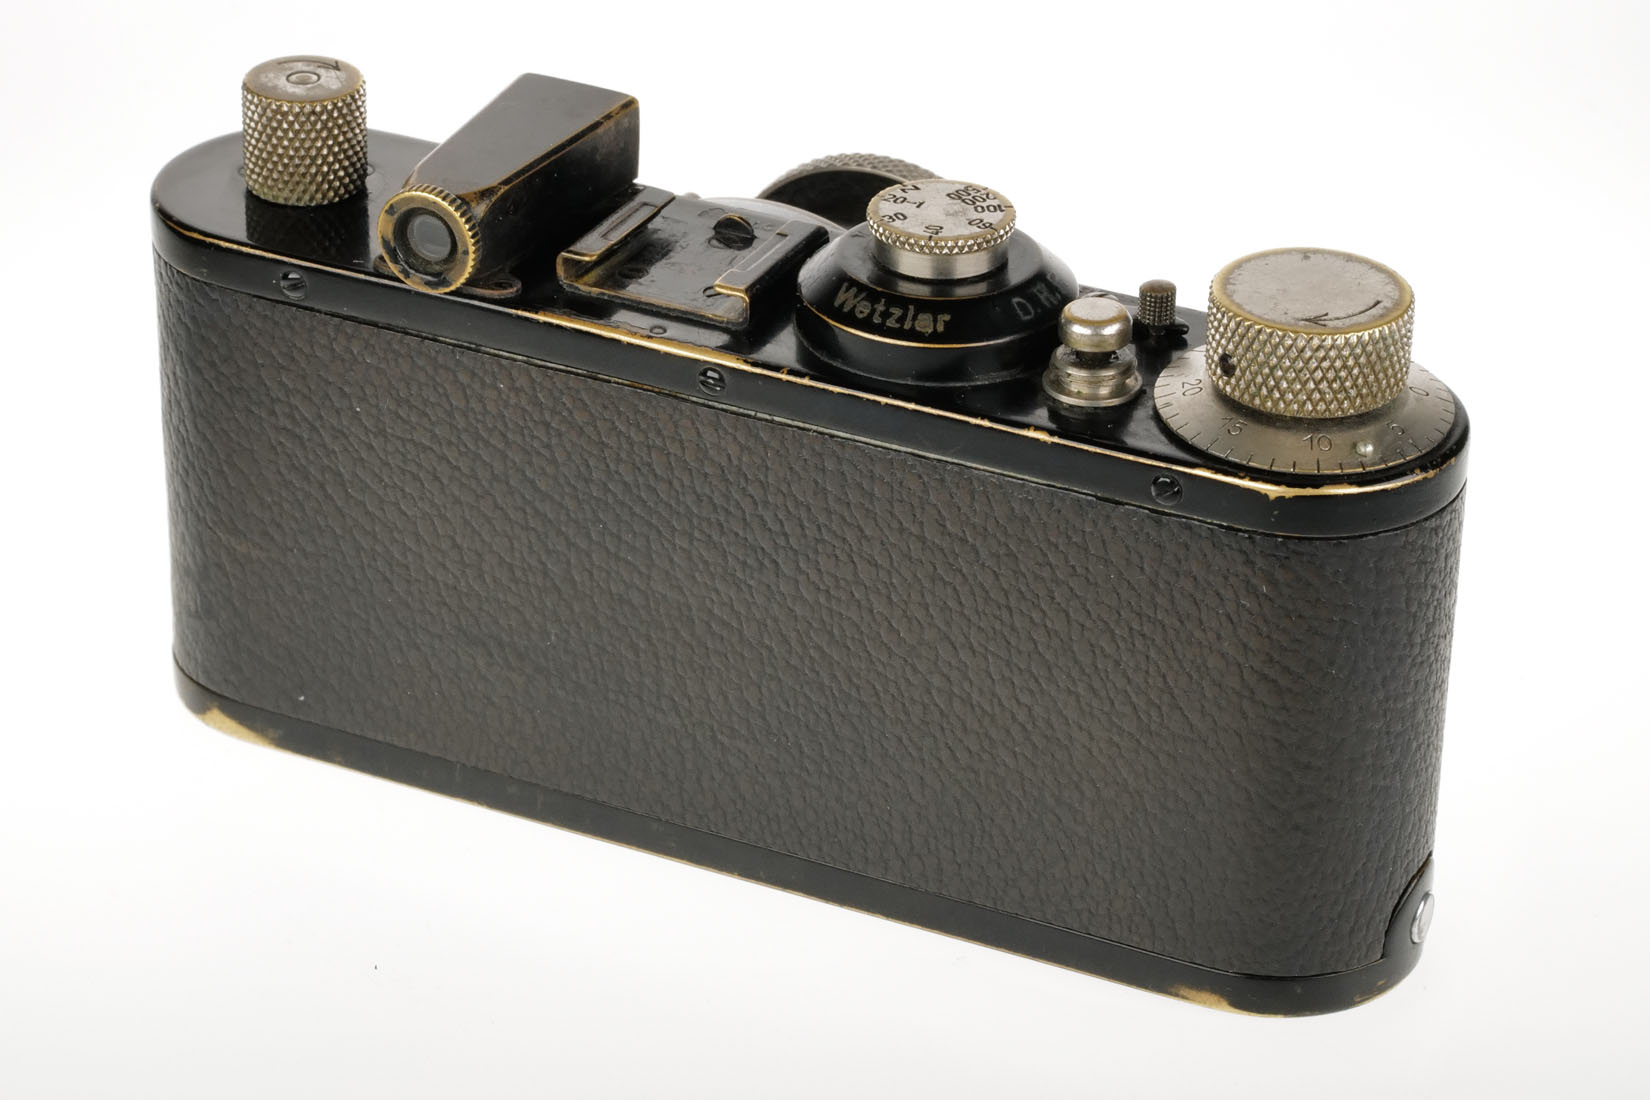 Leica I conversion to Standard